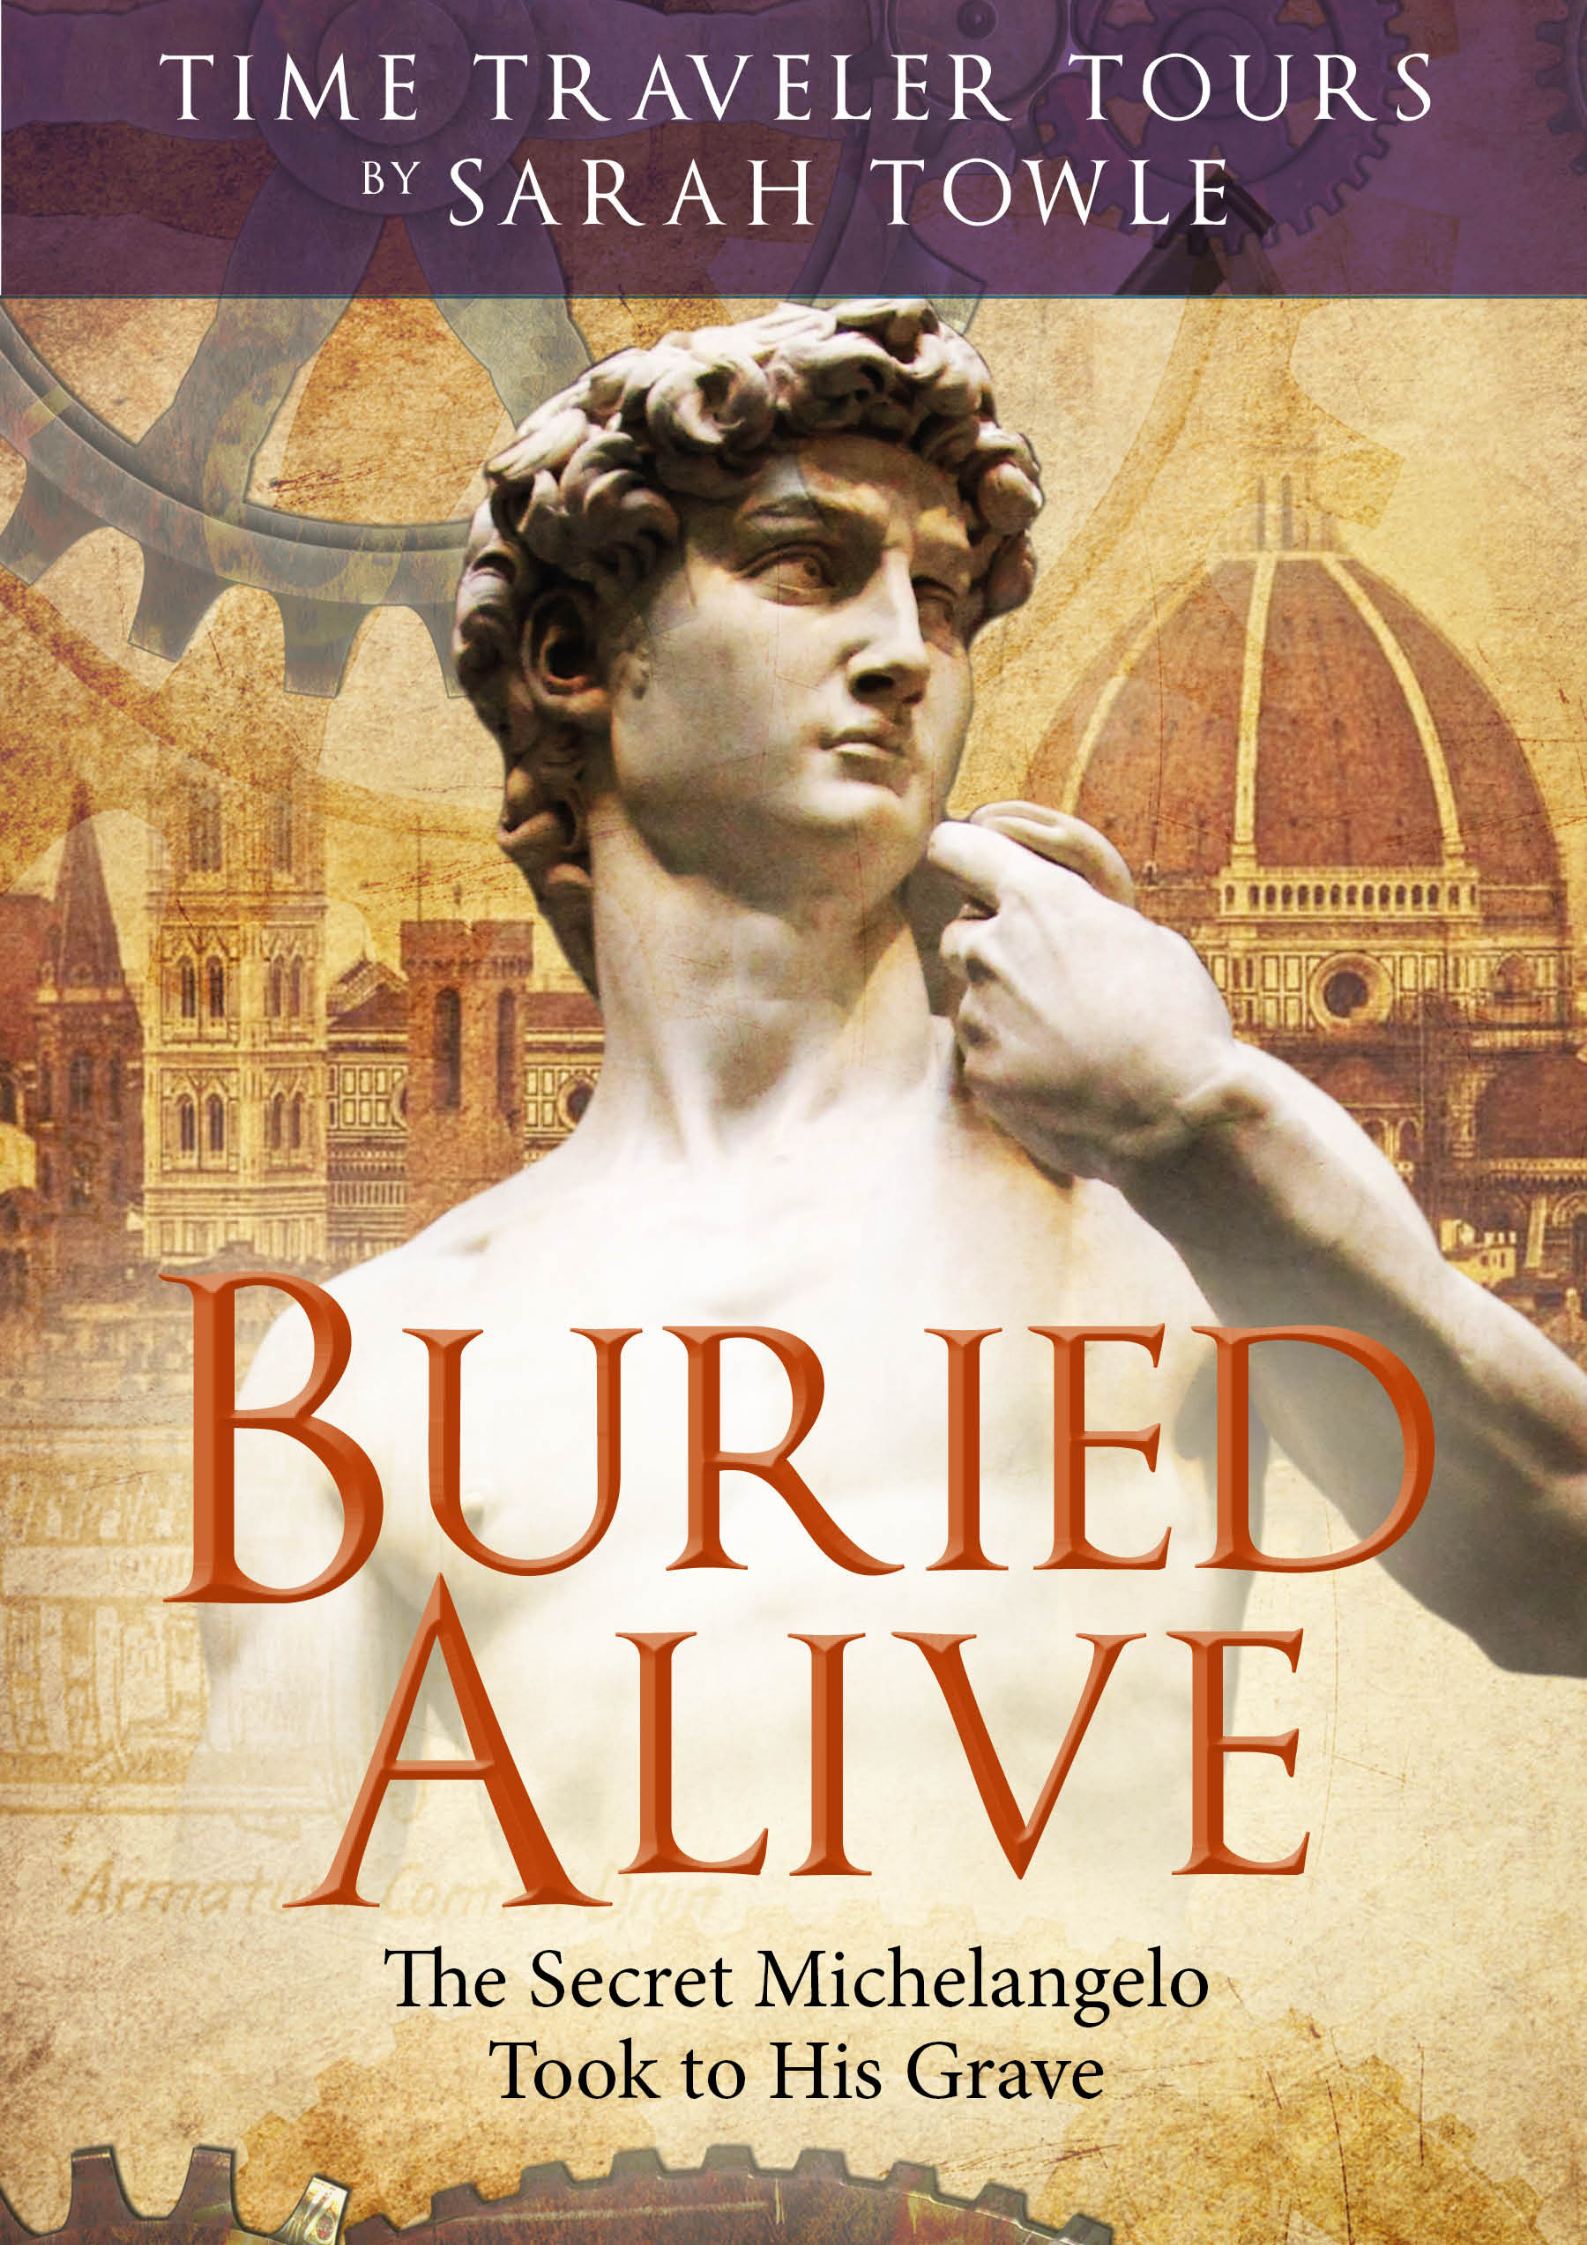 BURIED ALIVE: The Secret Michelangelo Took to His Grave